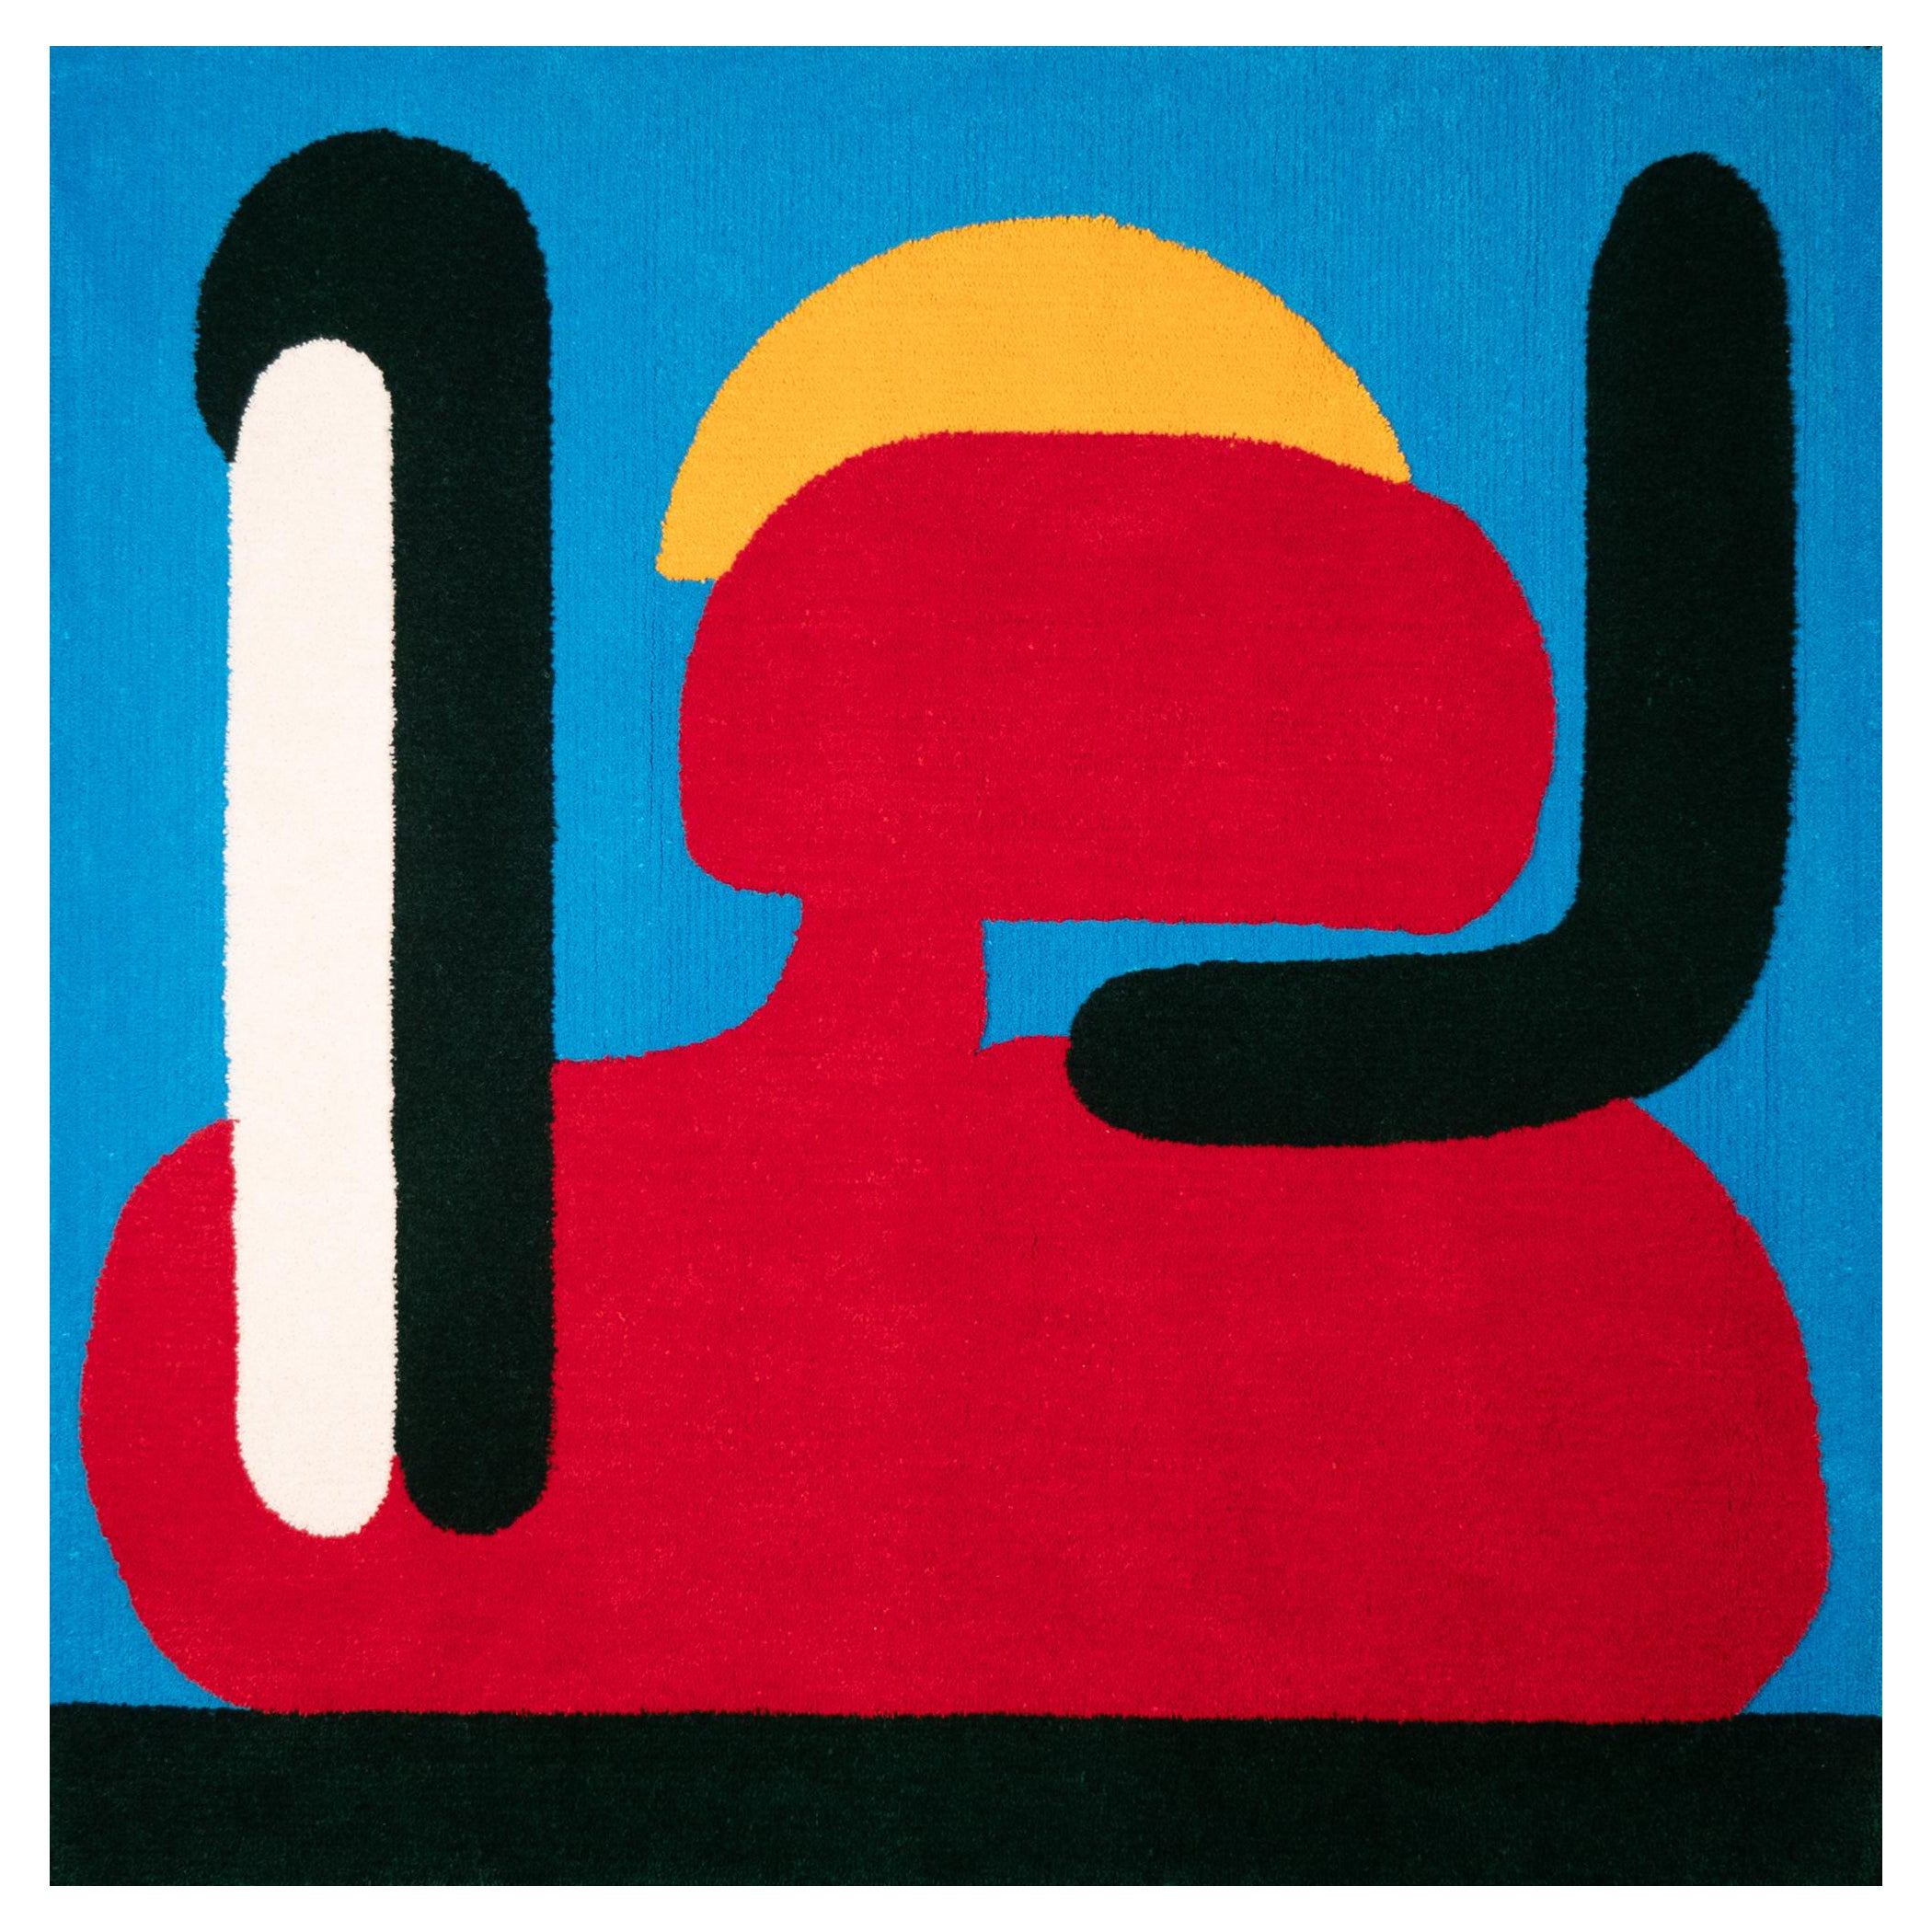 Abstract Rug in Primary Colors, Tufted New Zealand Wool